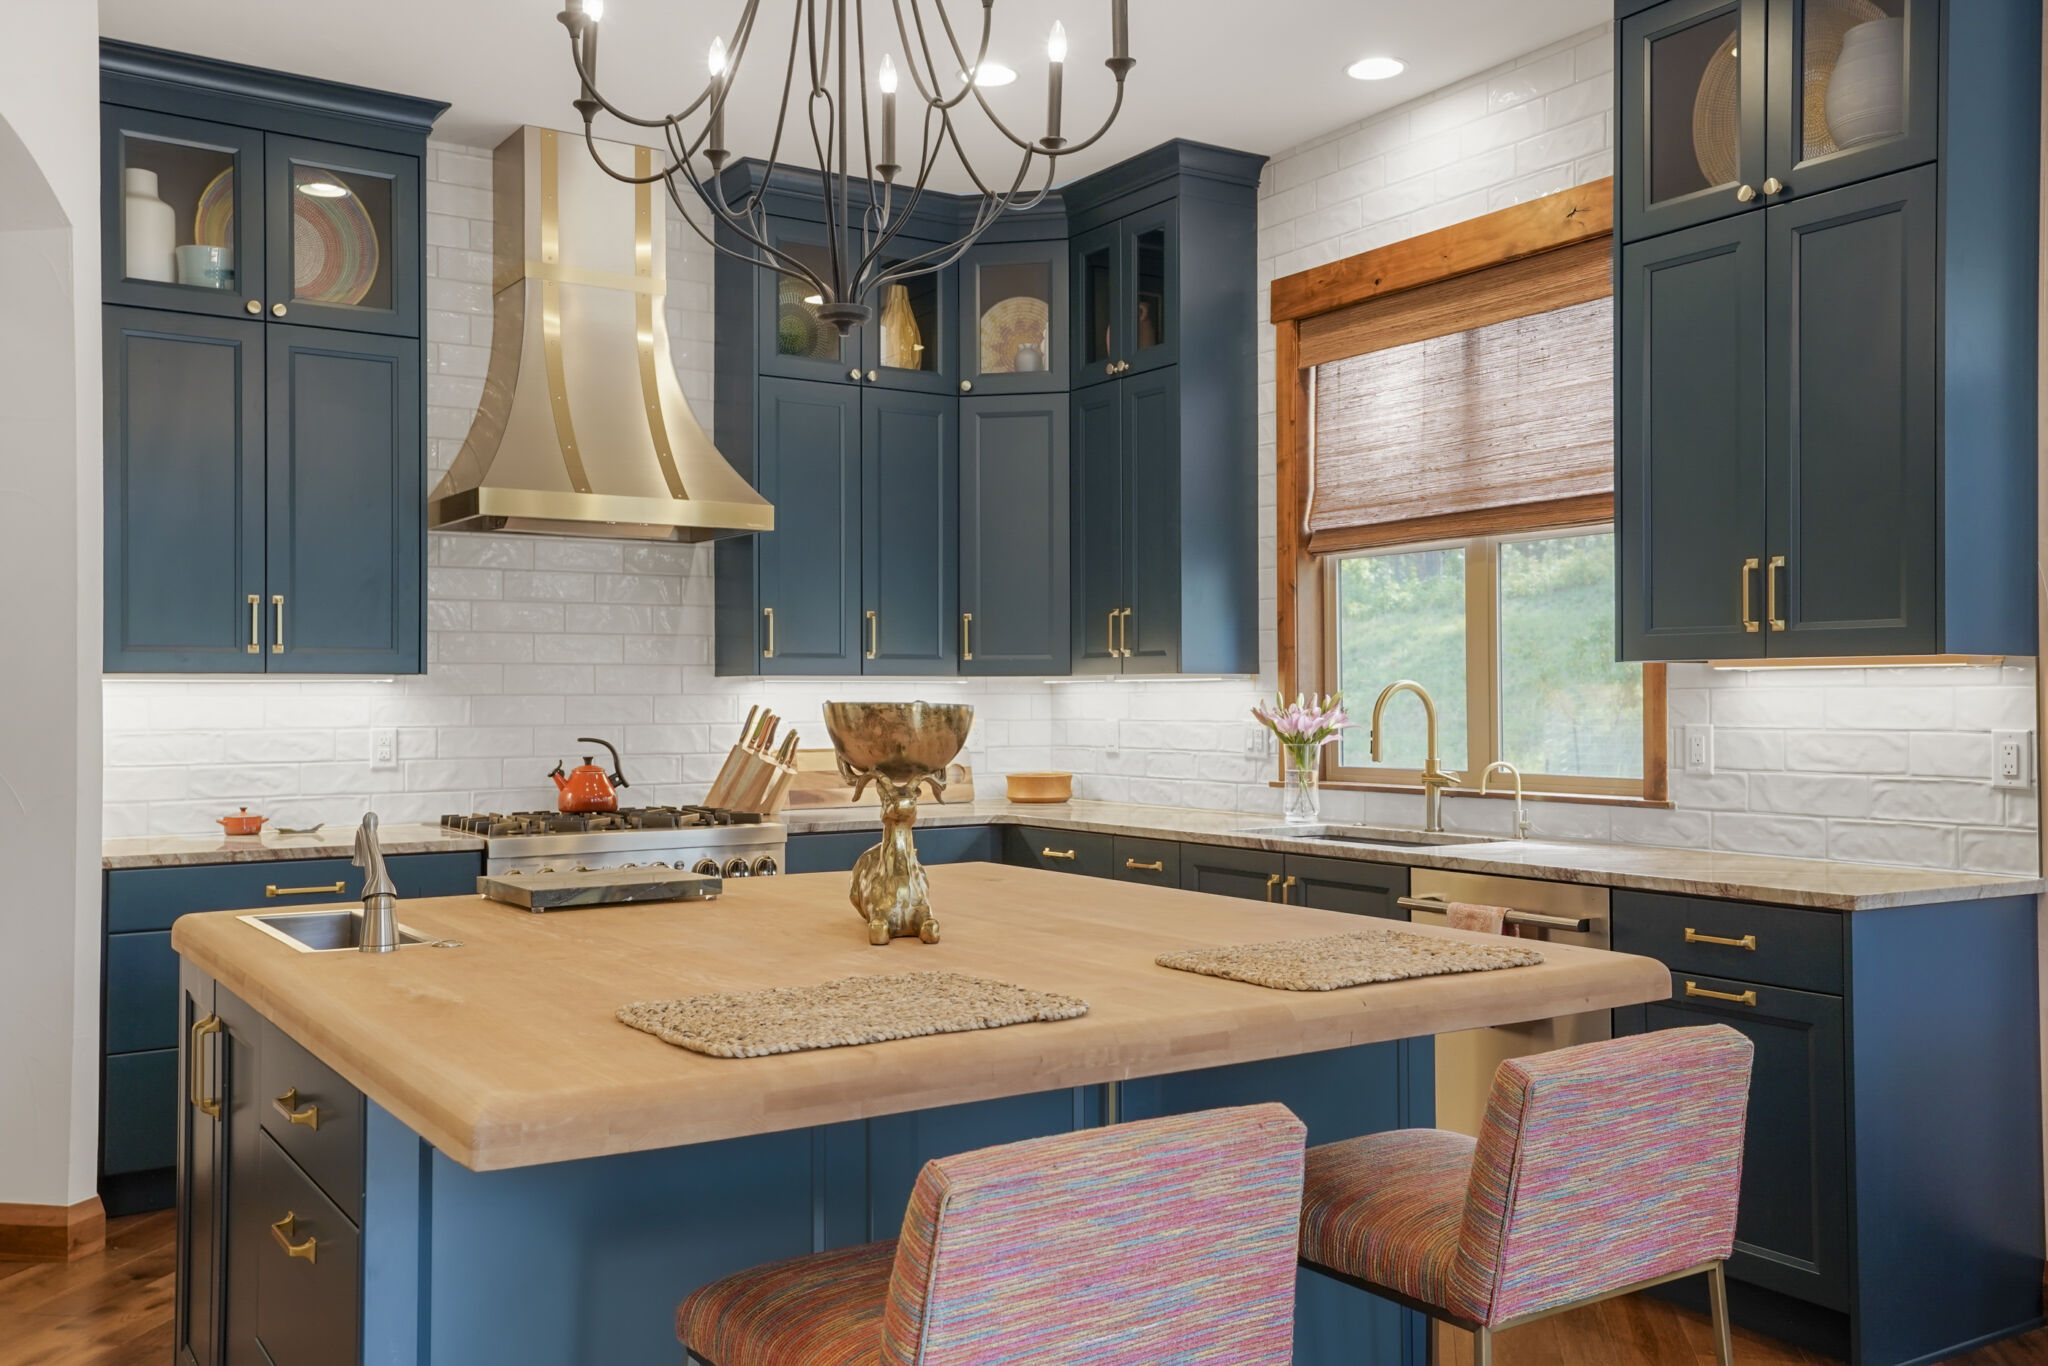 Kitchen remodel featuring teal painted cabinets and butcher block island top